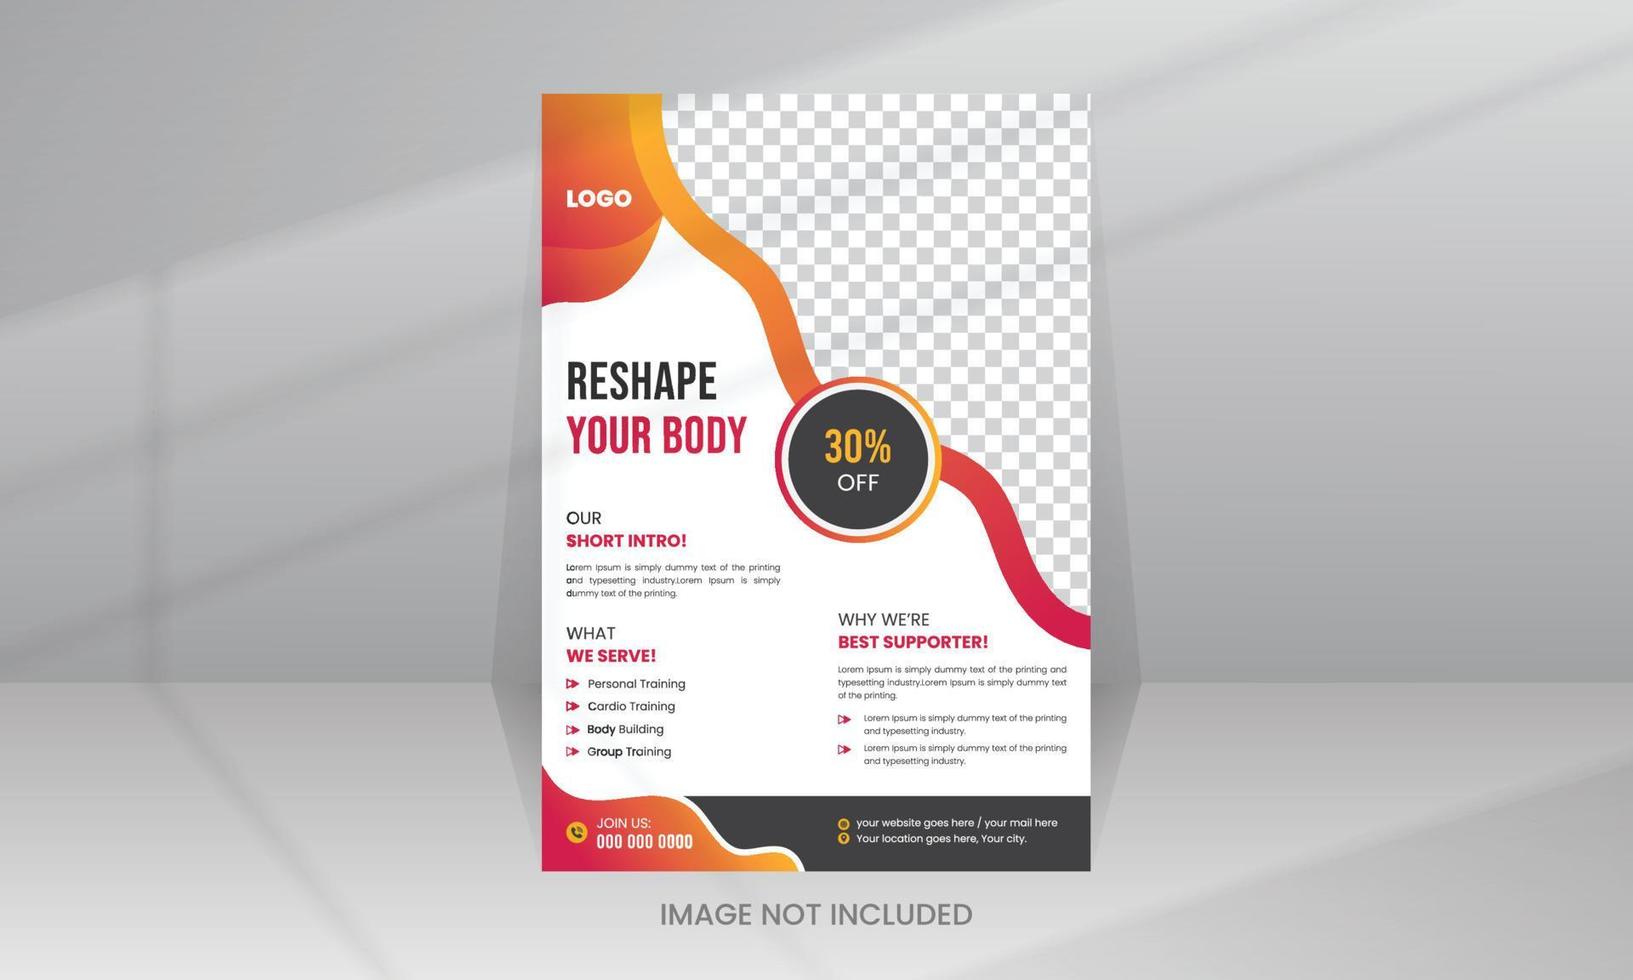 Reshape body Fitness Club Gym Flyer template vector